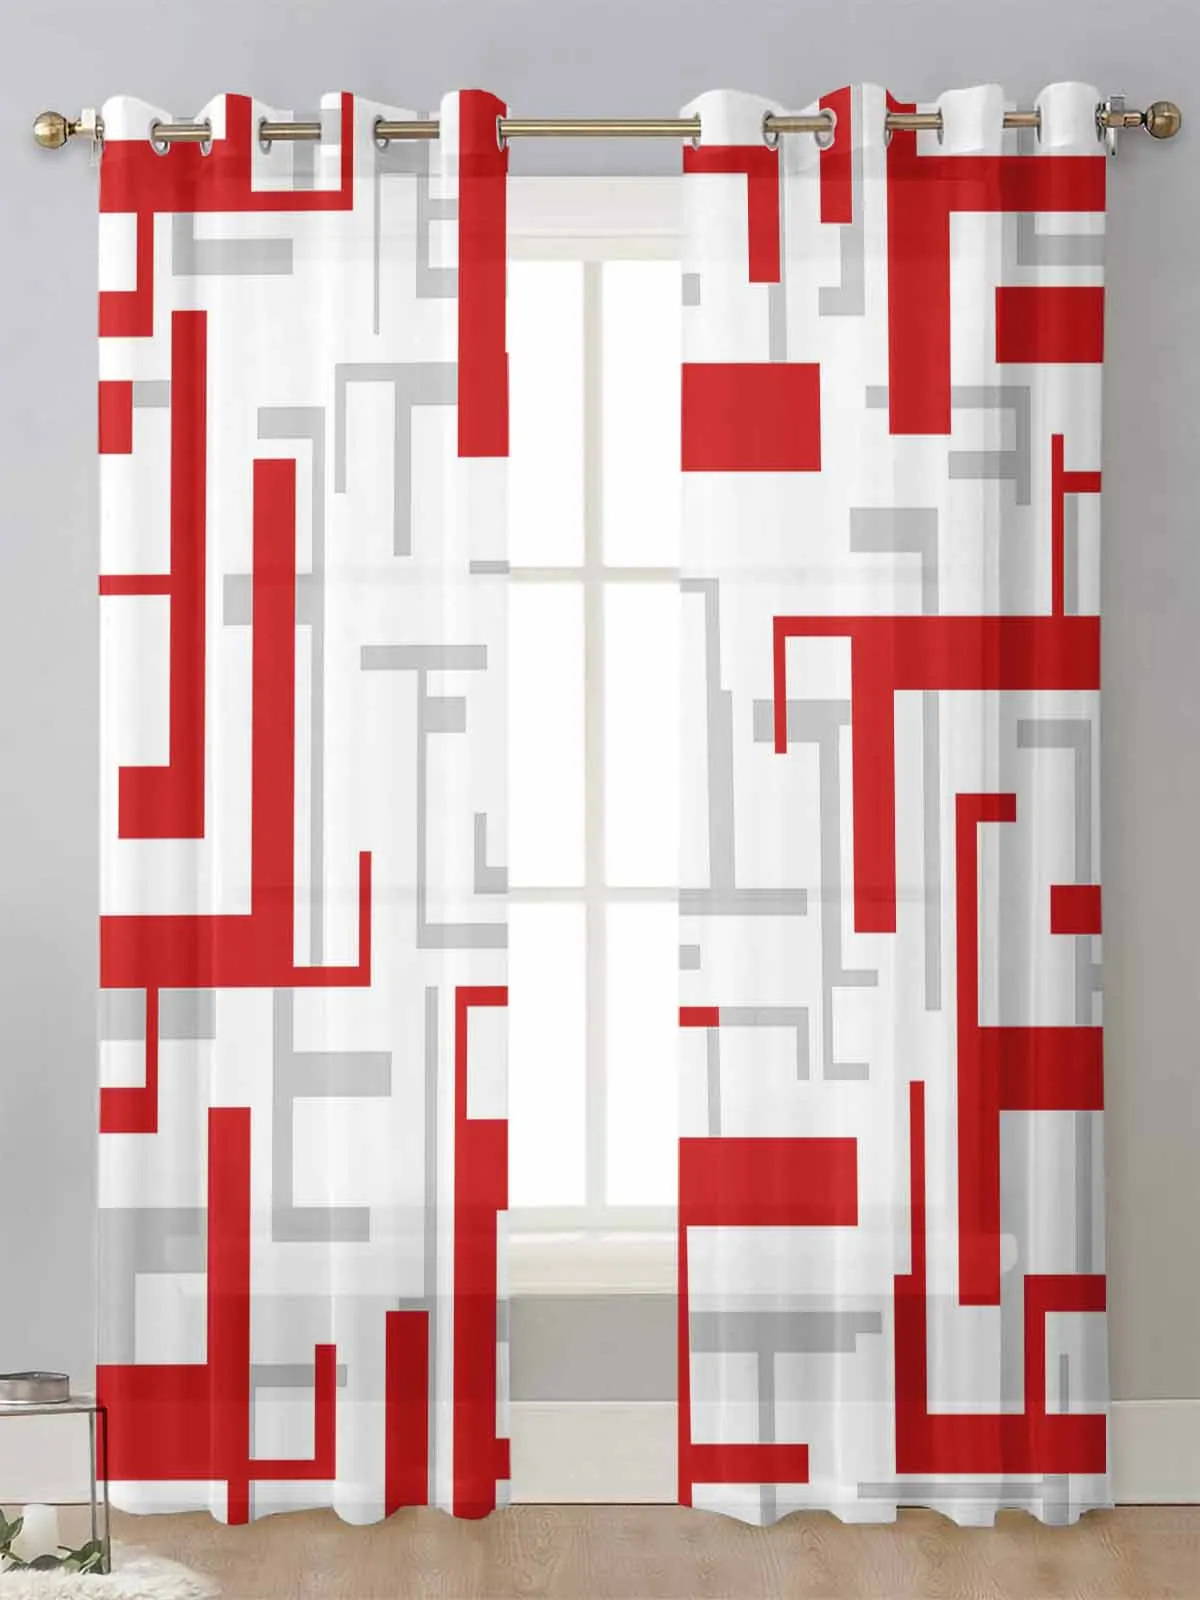 

Modern Art Geometry Red Grey Sheer Curtains For Living Room Window Transparent Voile Tulle Curtain Cortinas Drapes Home Decor